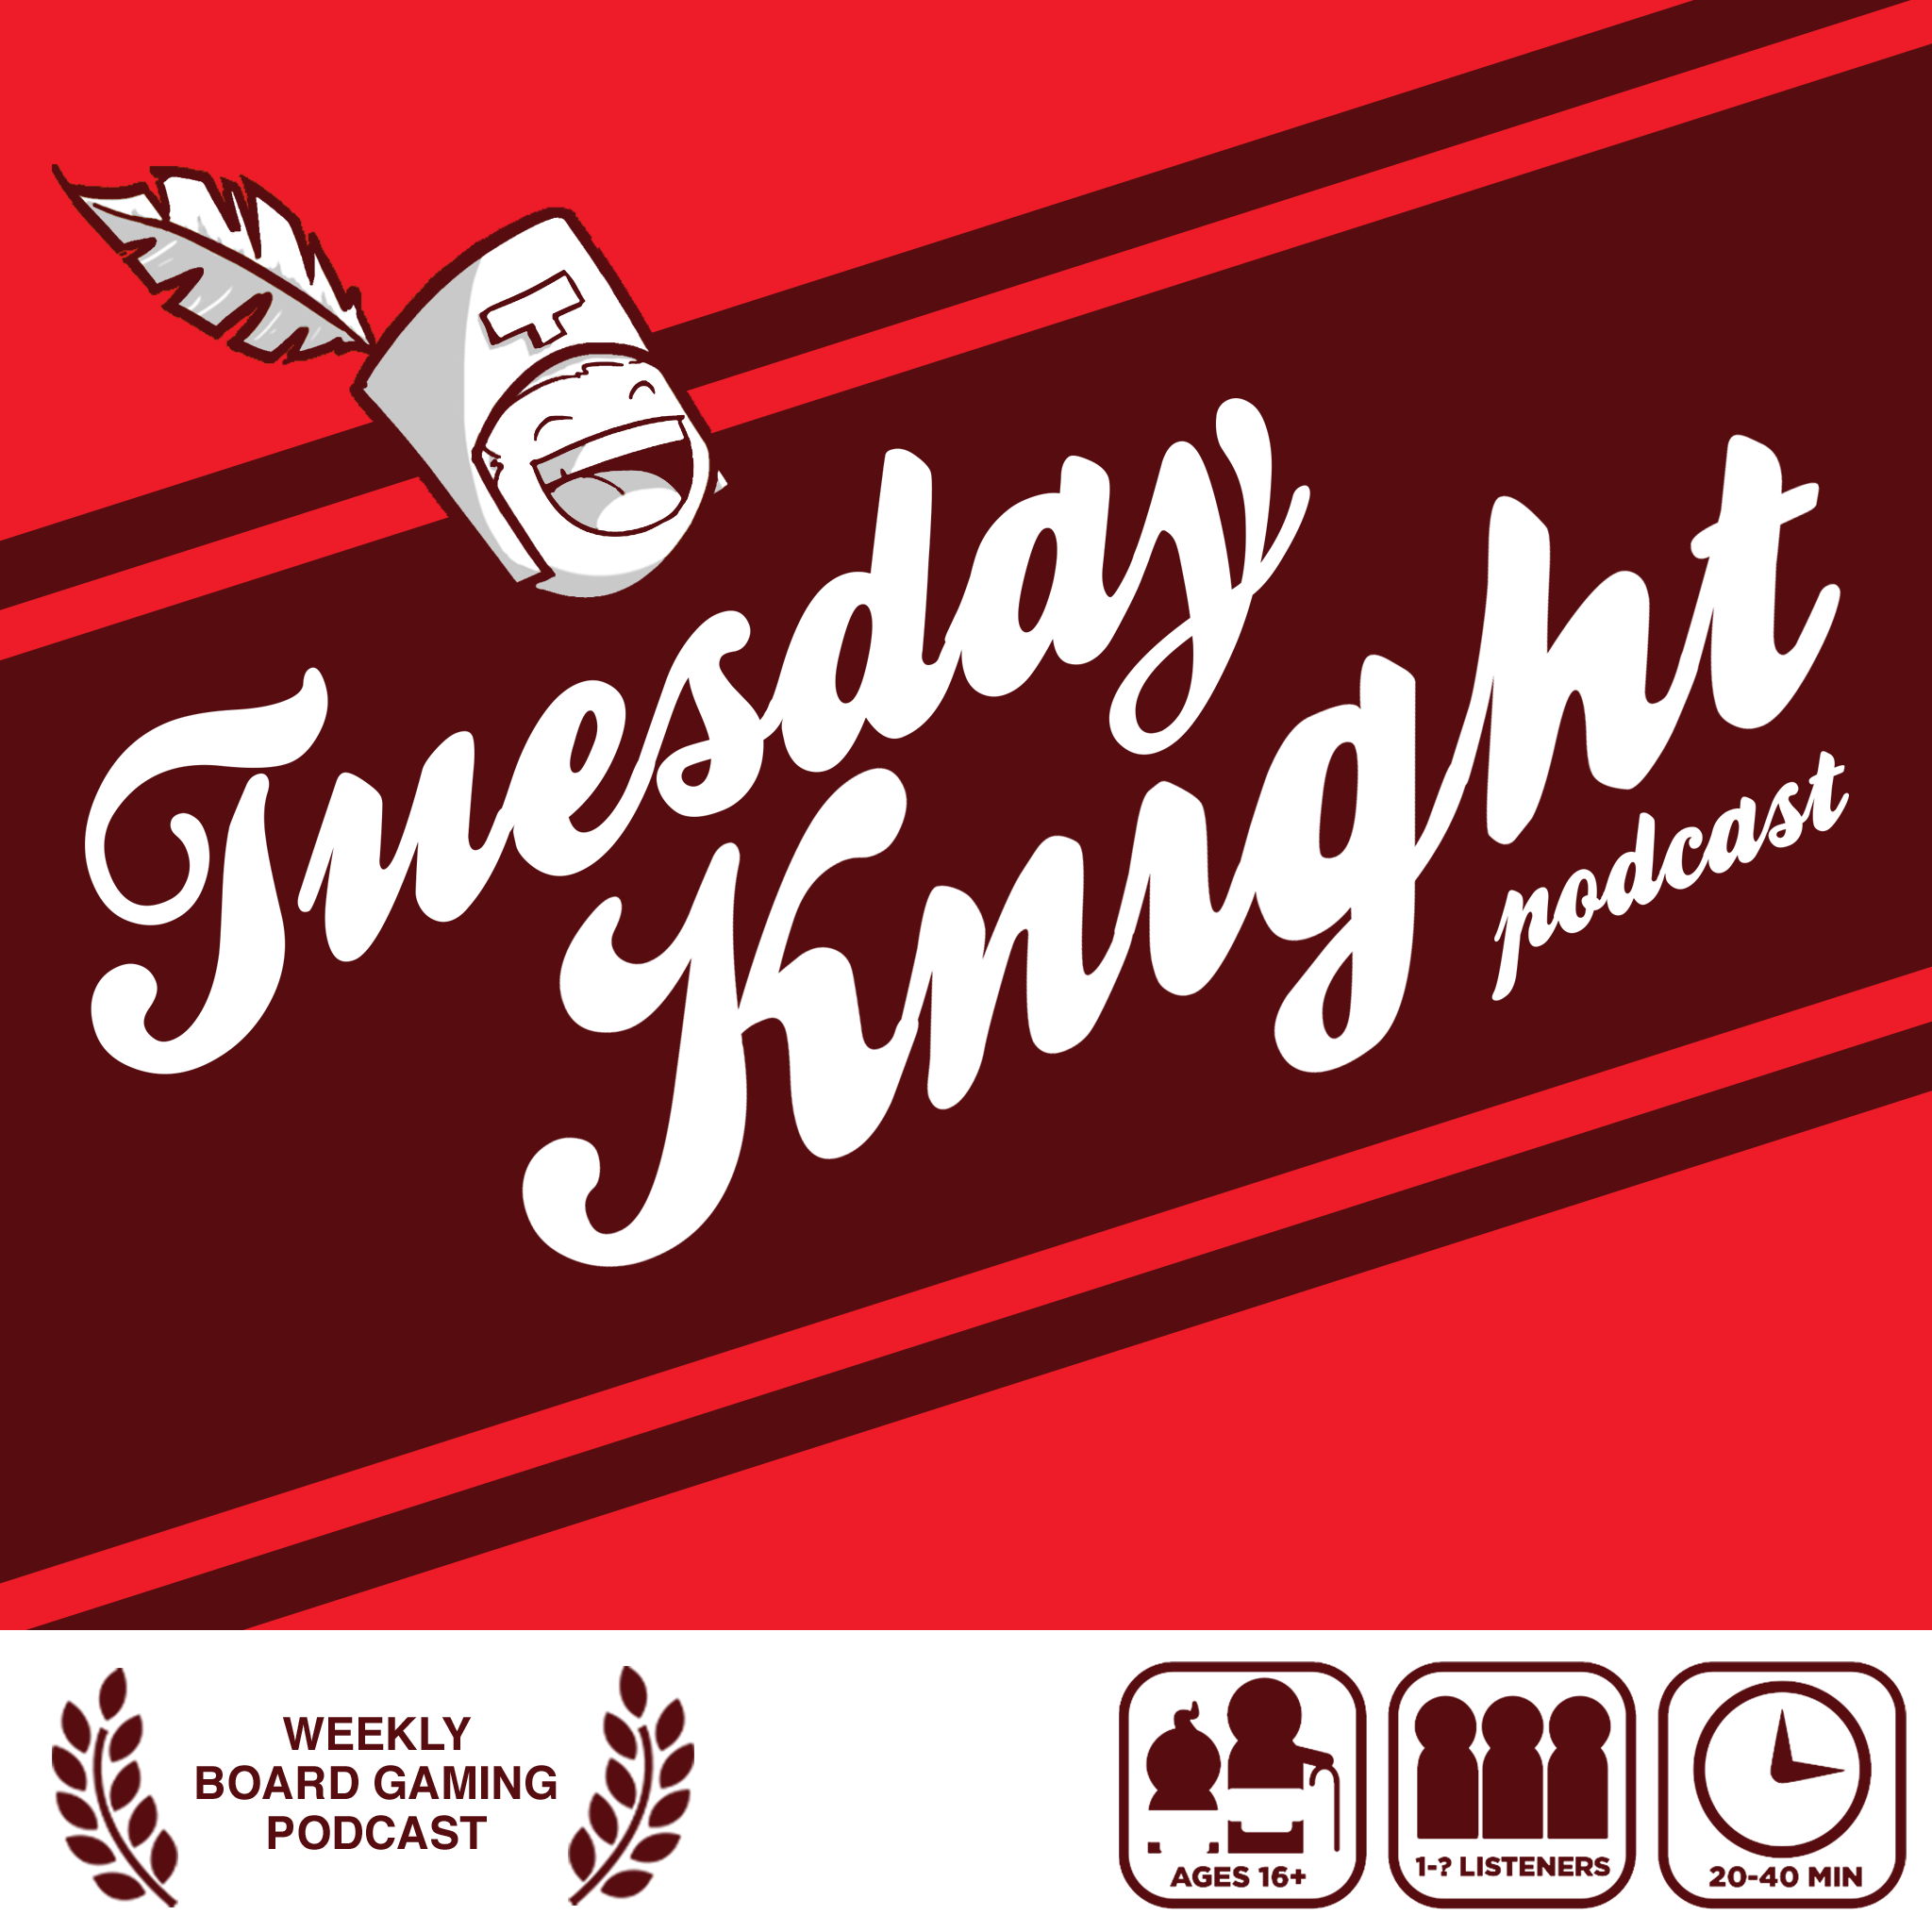 Tuesday Knight Podcast | All About Board Games